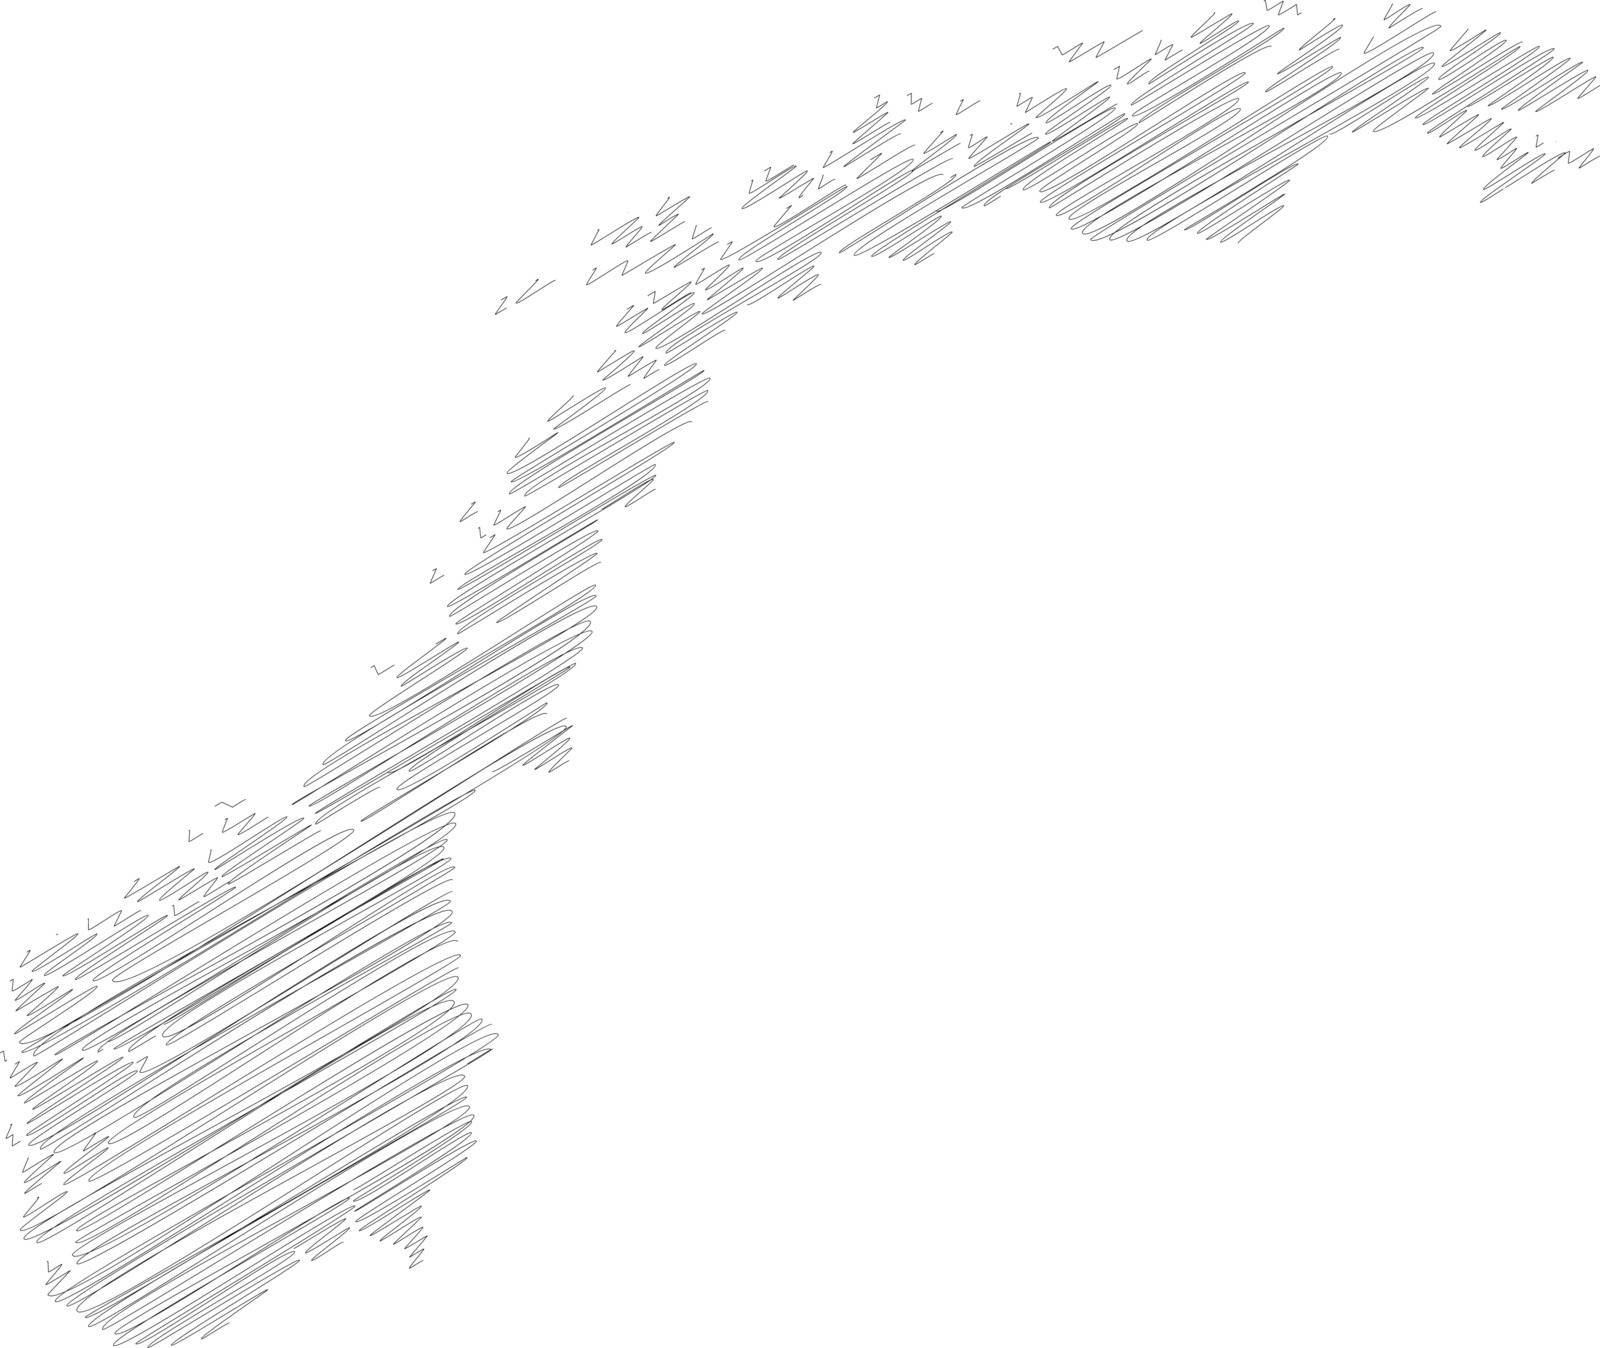 Norway - pencil scribble sketch silhouette map of country area with dropped shadow. Simple flat vector illustration.